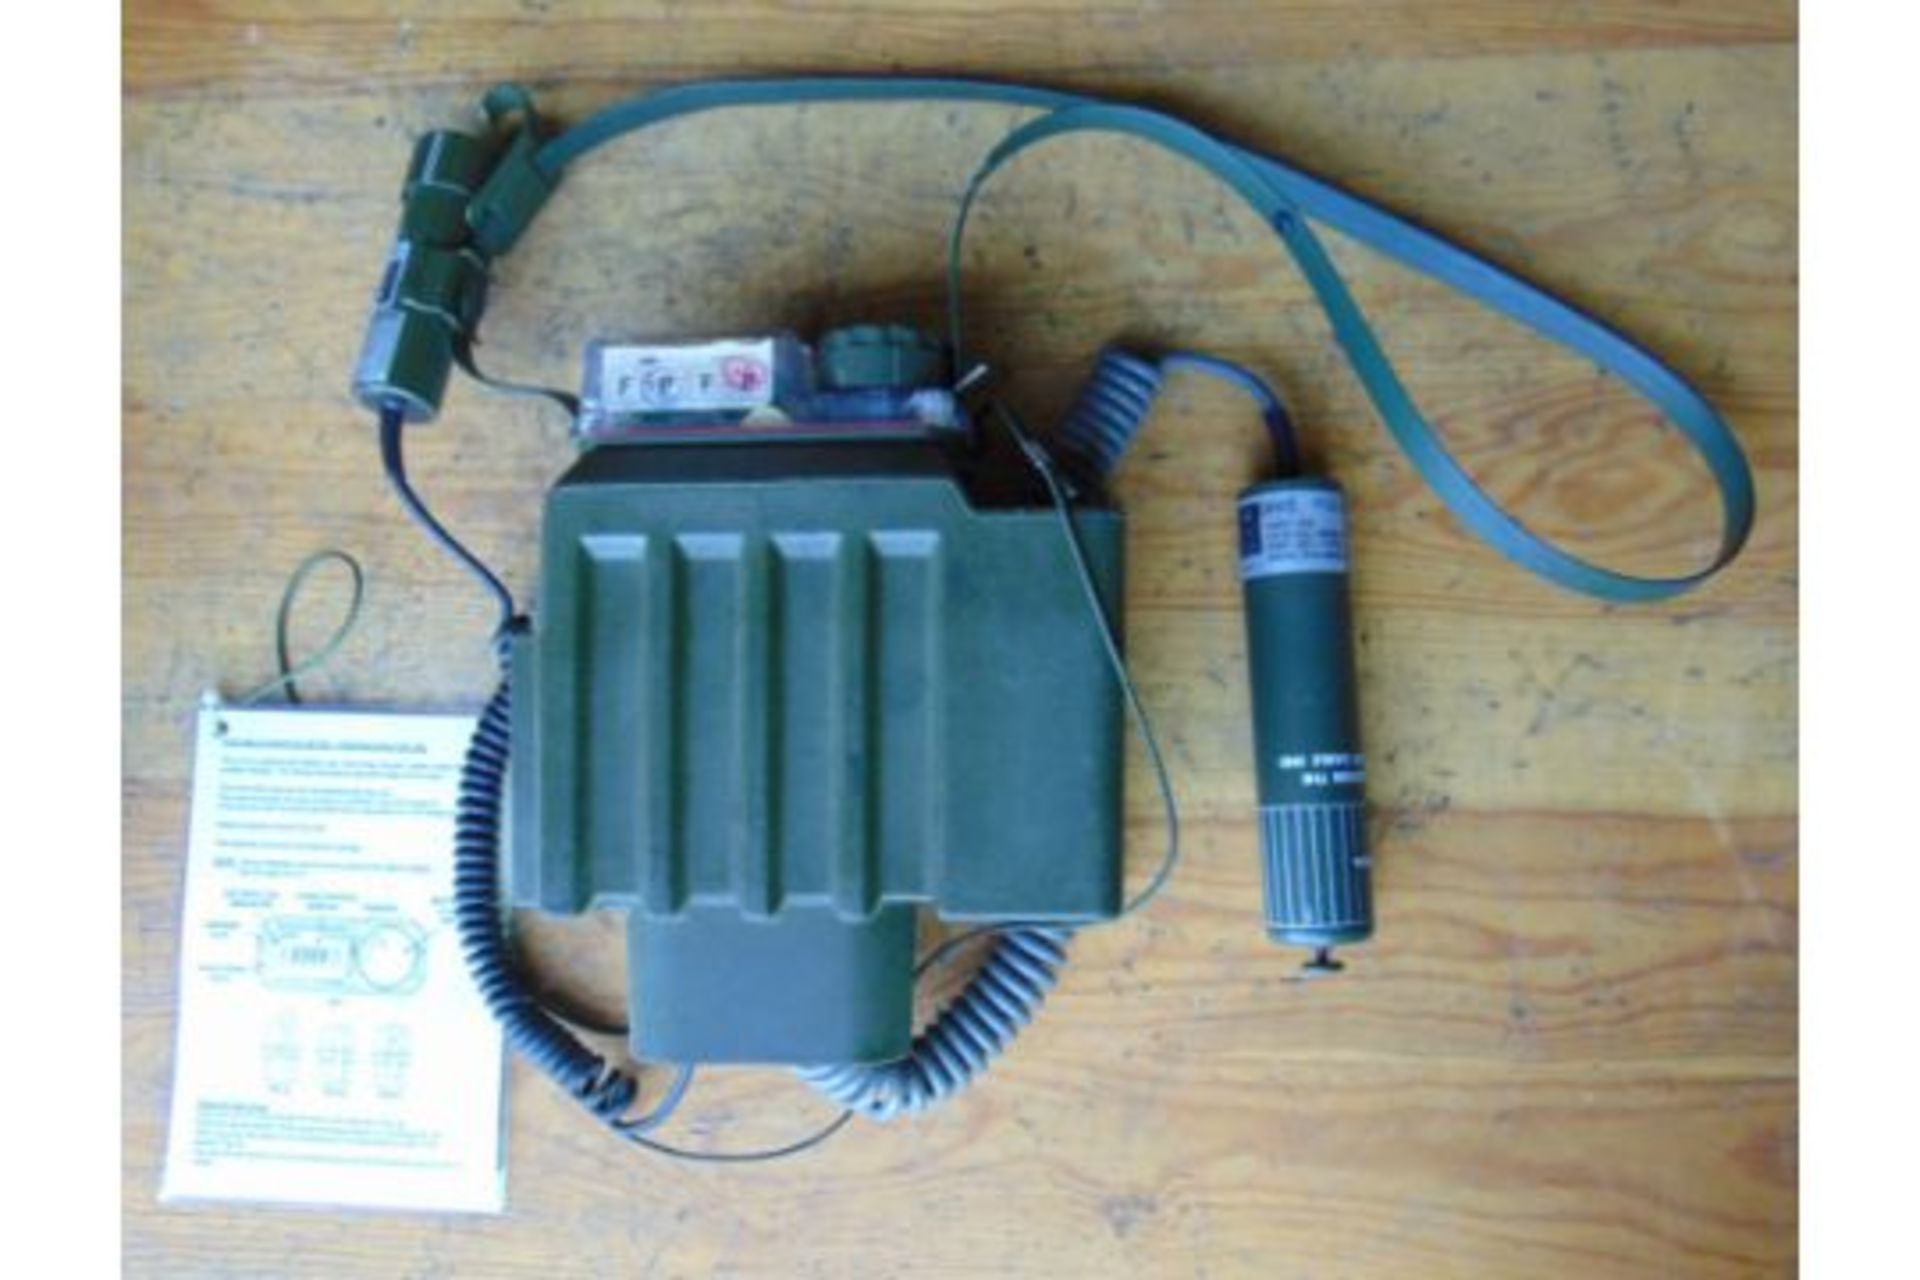 Portable Dose Rate Meter W/ Probe, Audible Indicator, Carry Strap & Operations Card